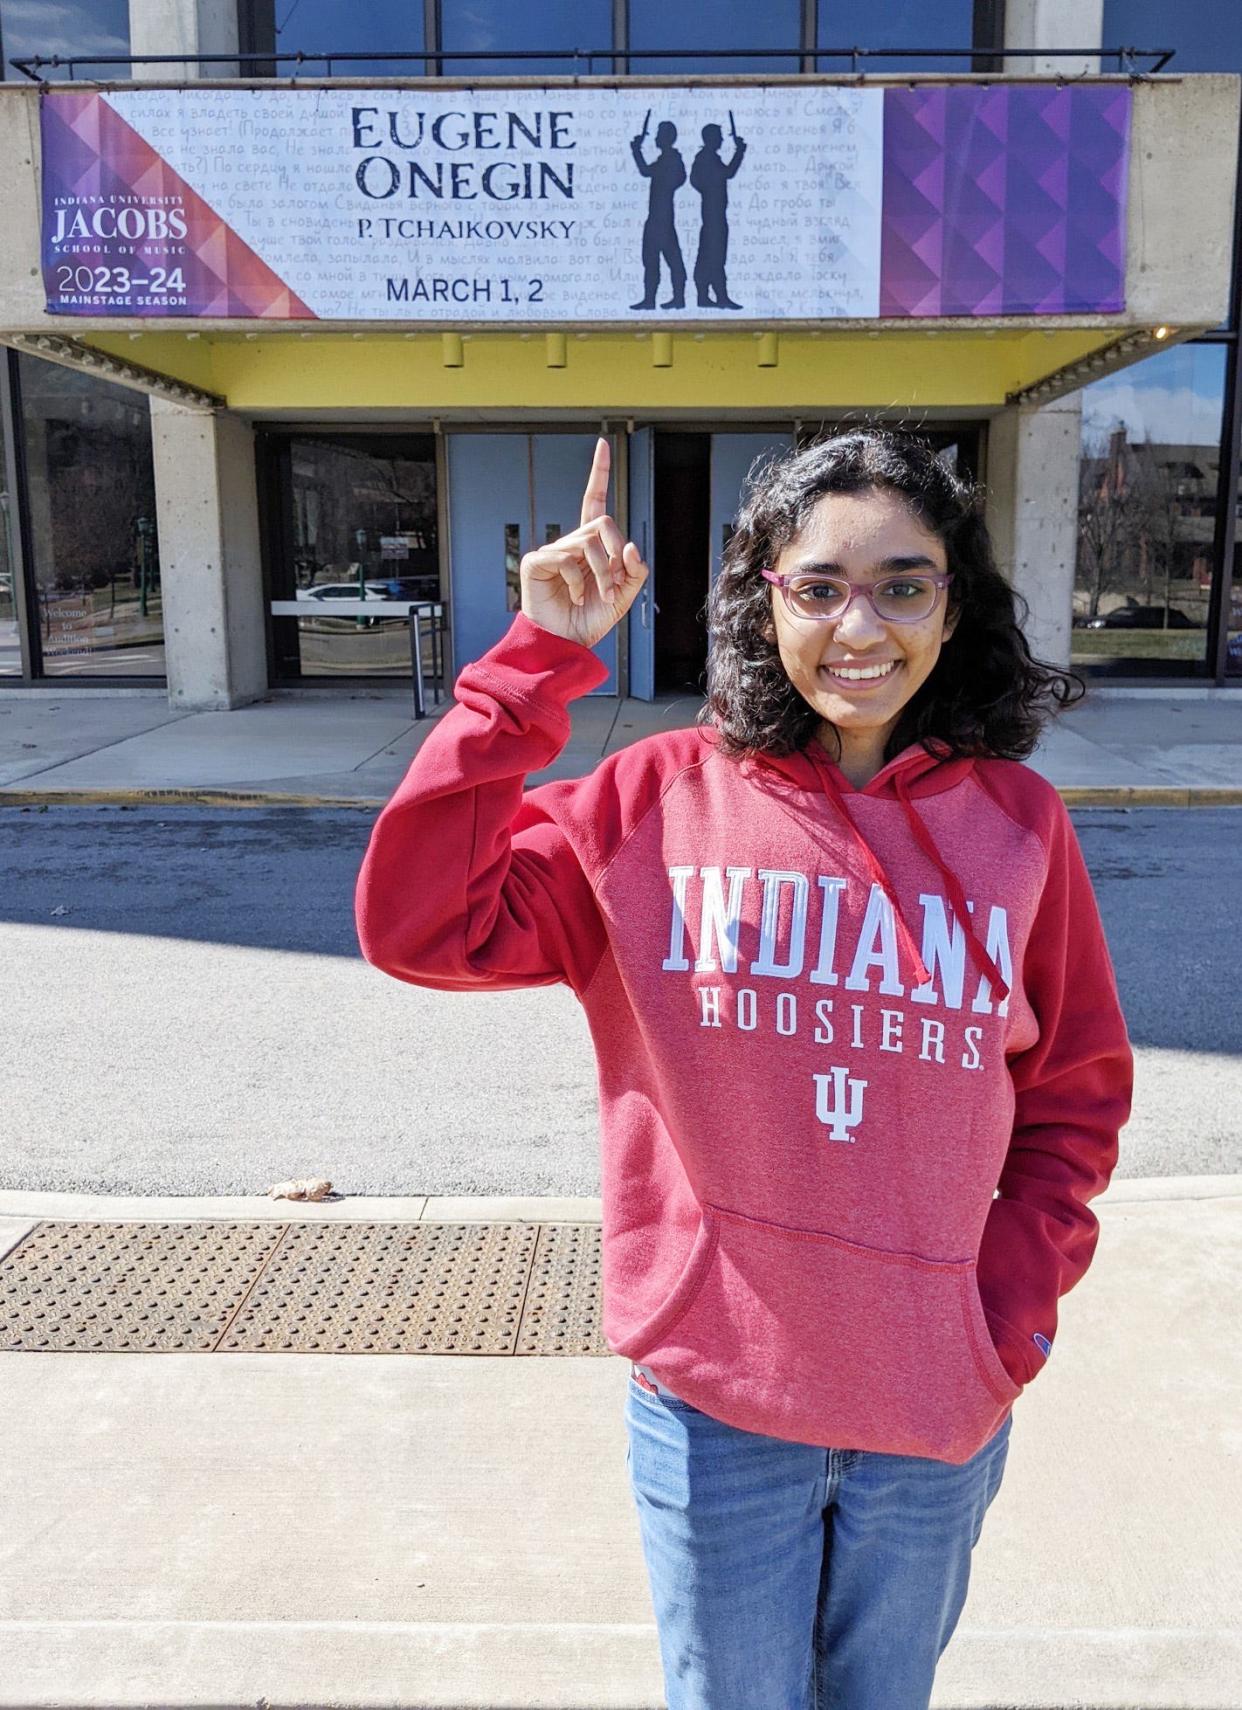 Tiara Abraham points to the sign announcing the performance of Eugene Onegin by the Jacobs School of Music. She was one of the Indiana University students in the opera.